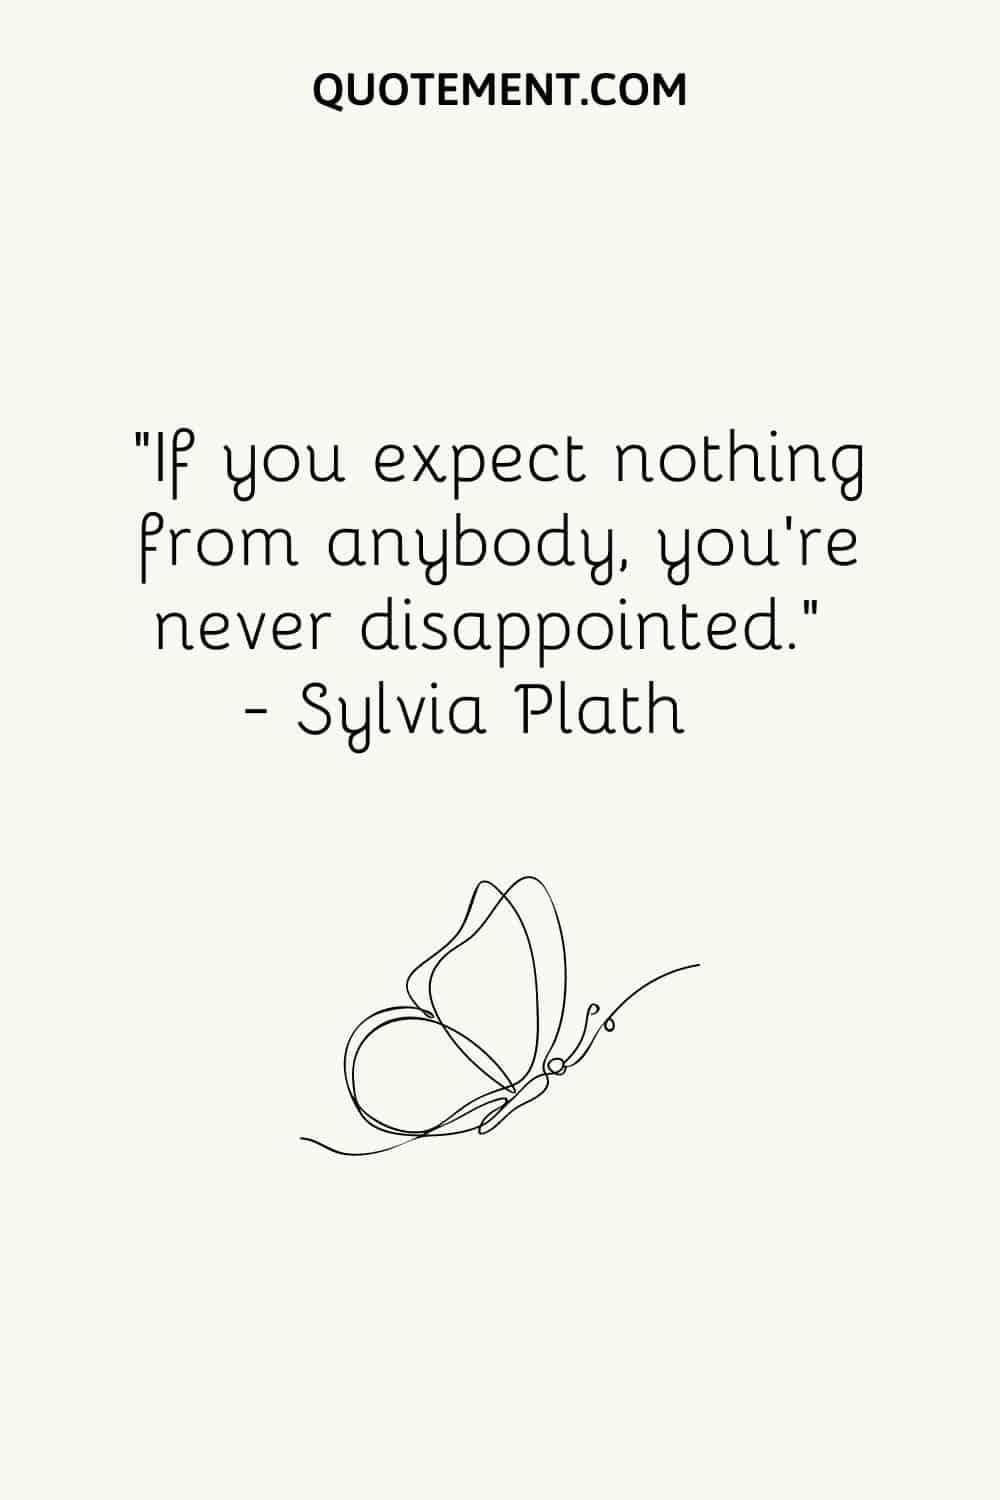 If you expect nothing from anybody, you’re never disappointed